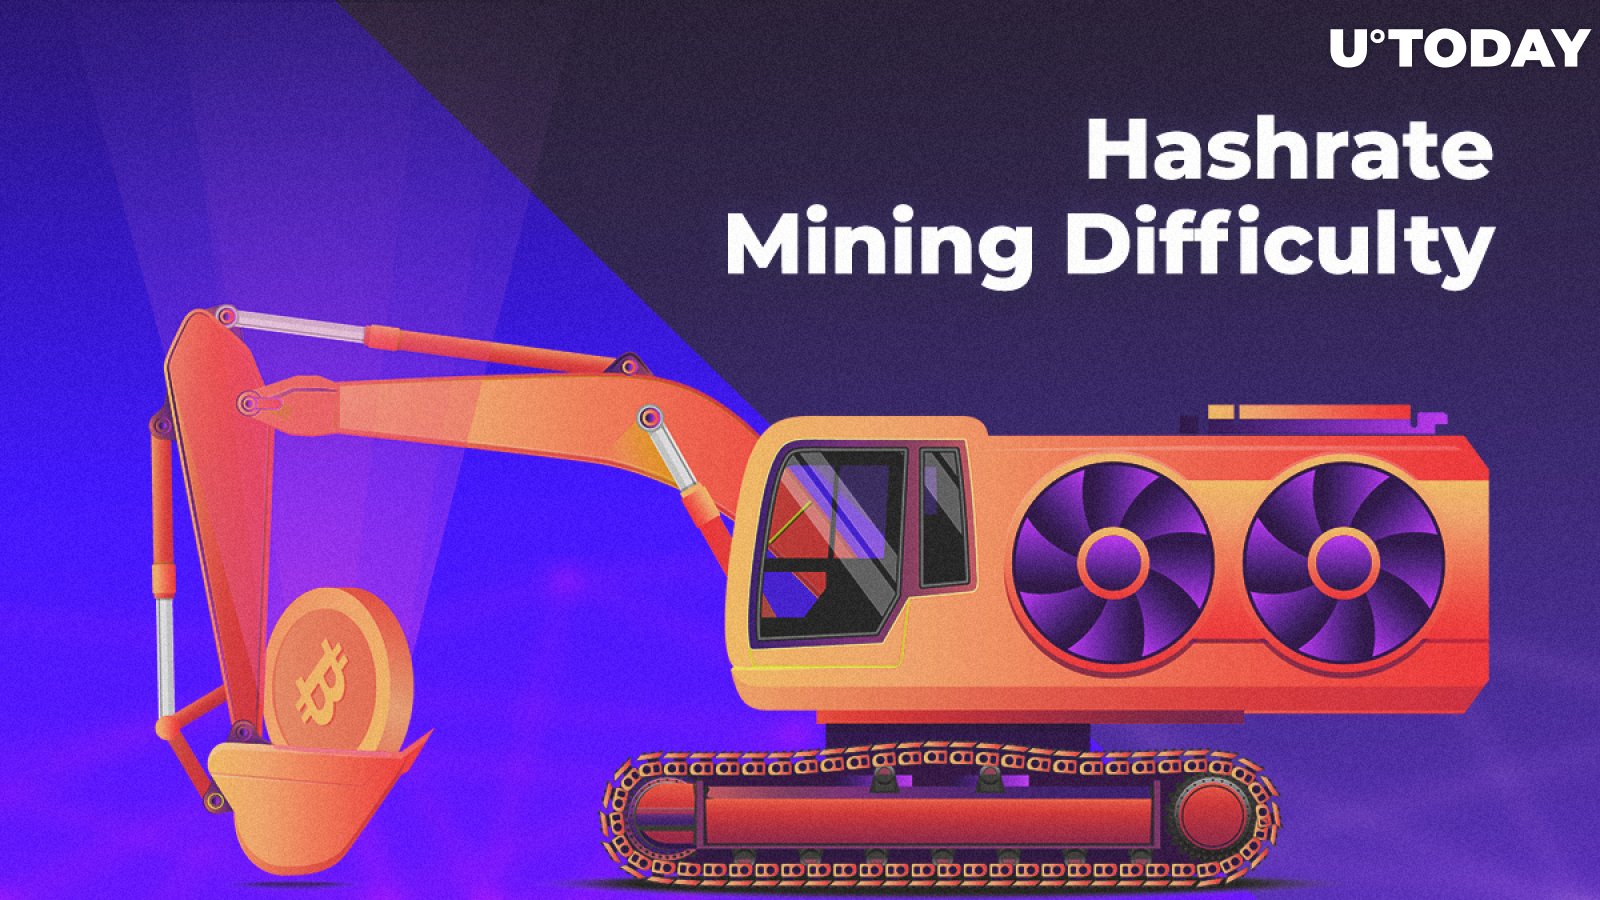 What Is Hashrate and Mining Difficulty?